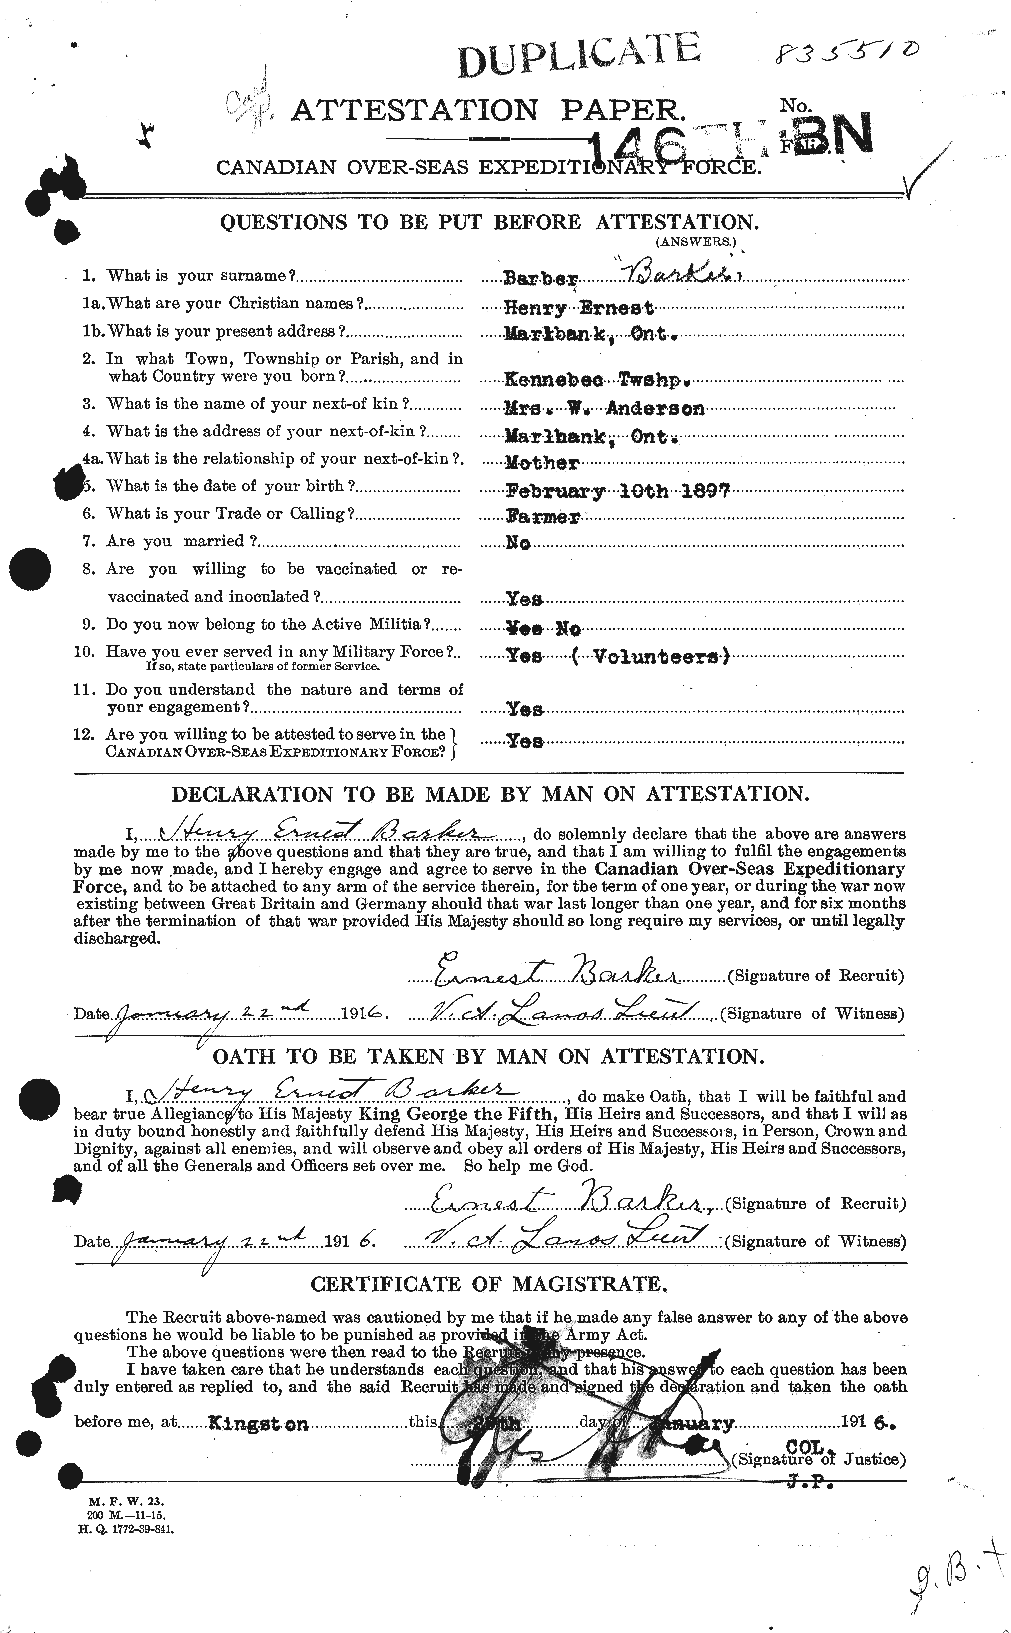 Personnel Records of the First World War - CEF 227504a